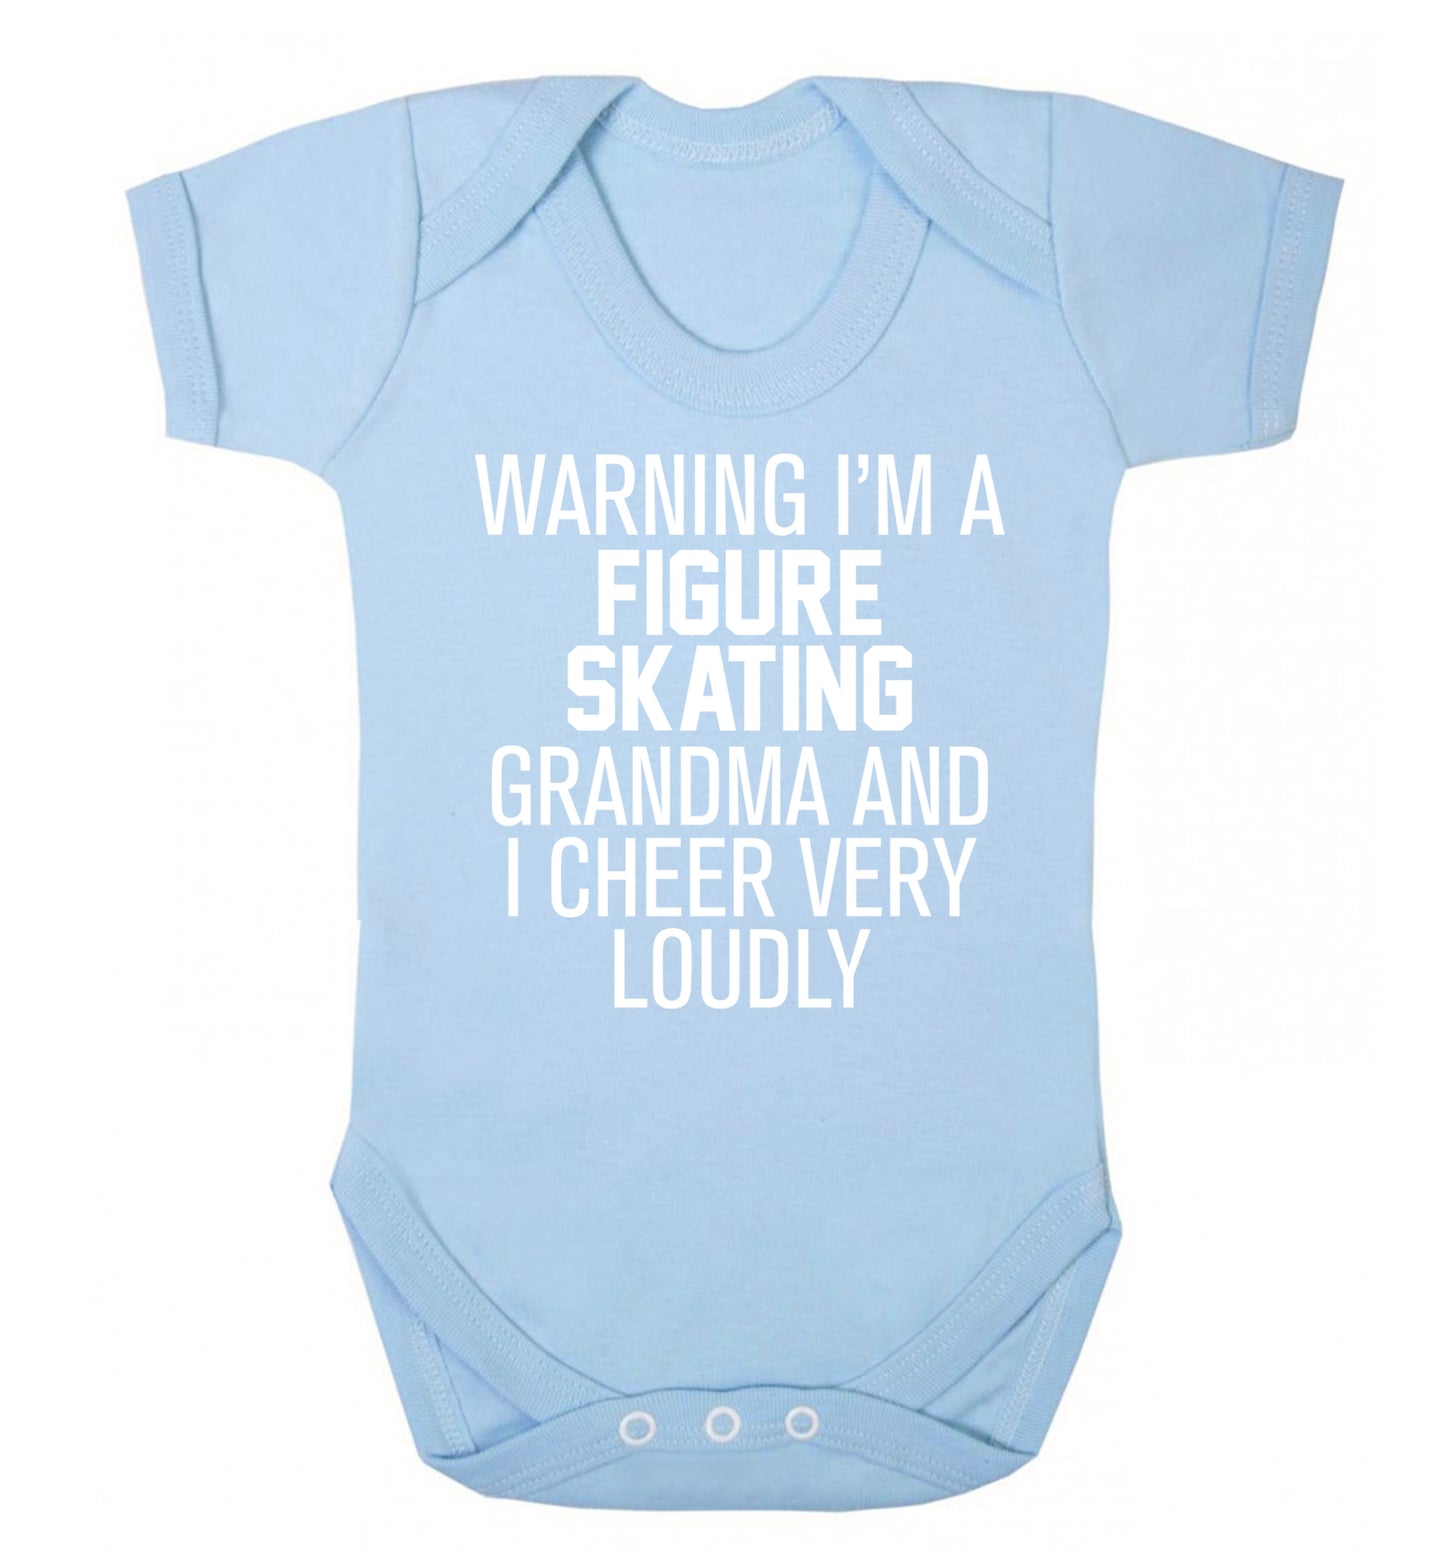 Warning I'm a figure skating grandma and I cheer very loudly Baby Vest pale blue 18-24 months